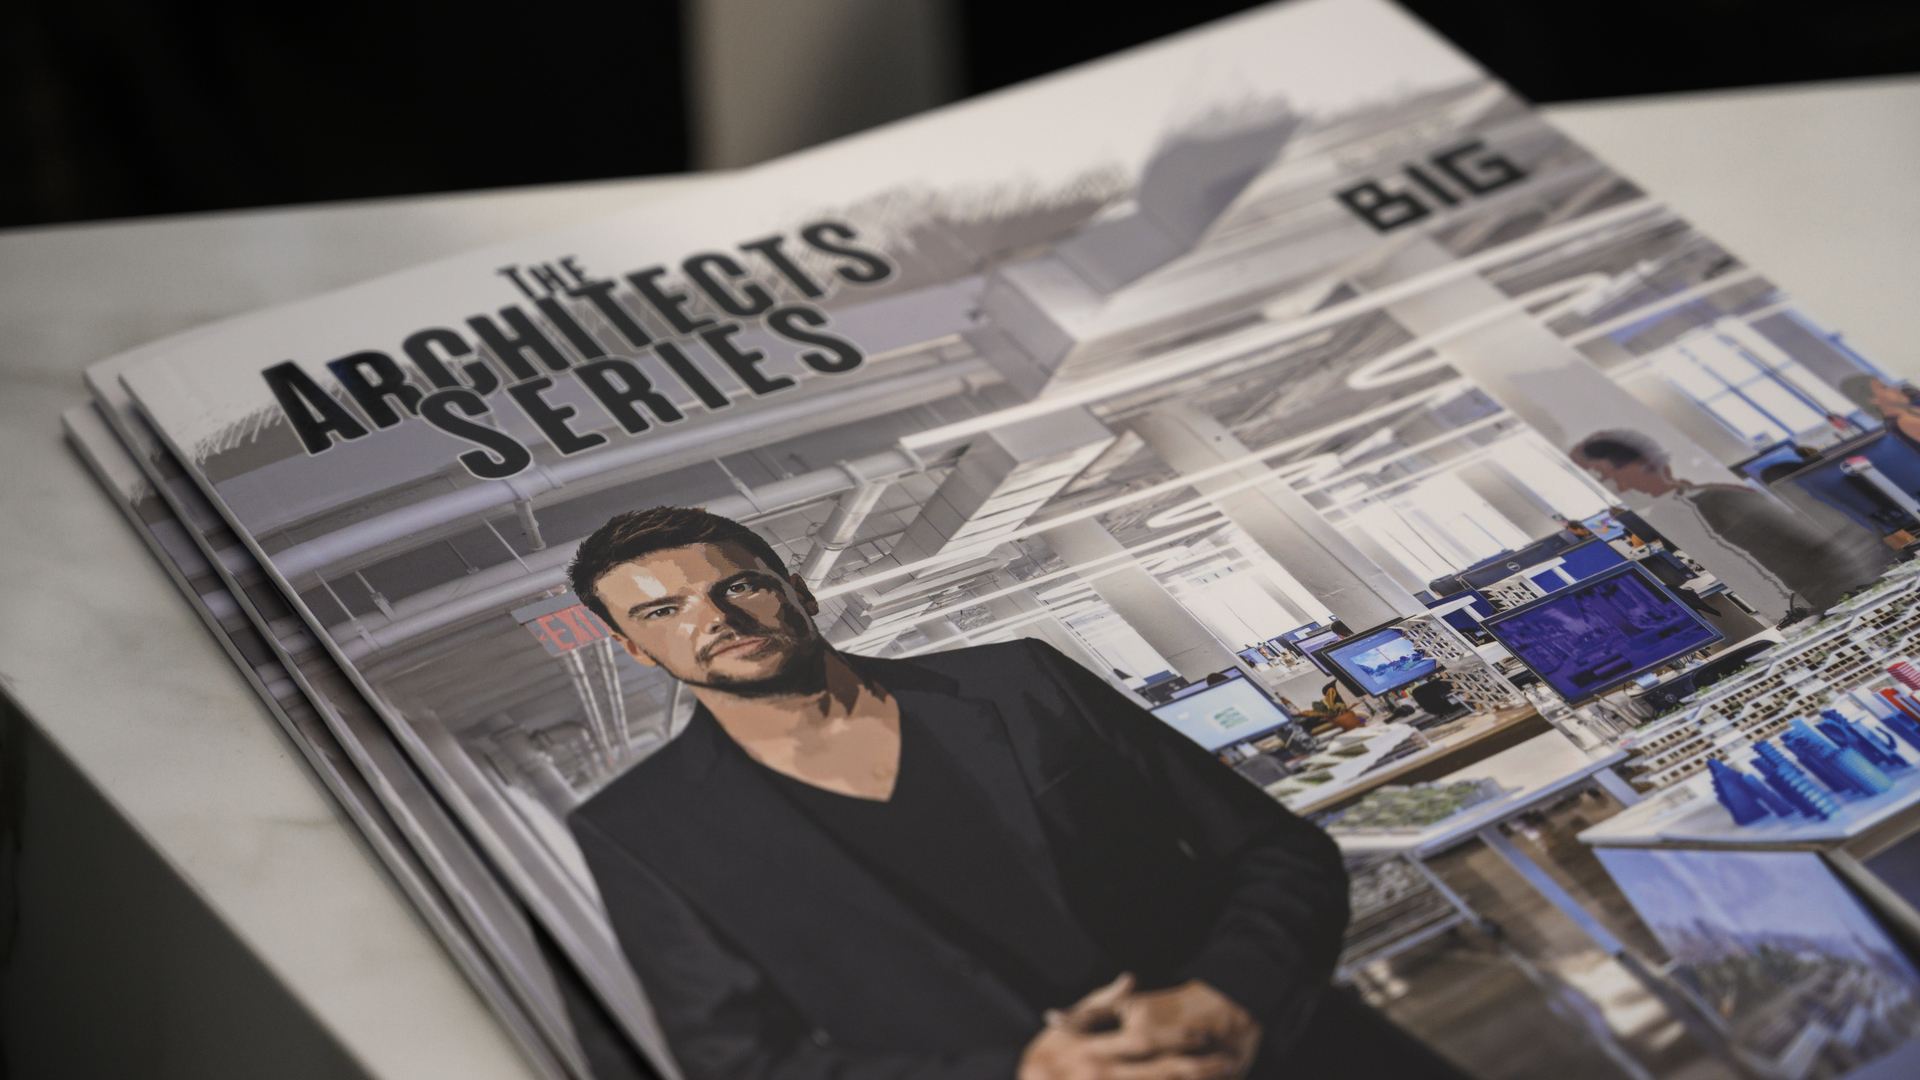 THE ARCHITECTS SERIES – A DOCUMENTARY ON: BIG – Bjarke Ingels Group